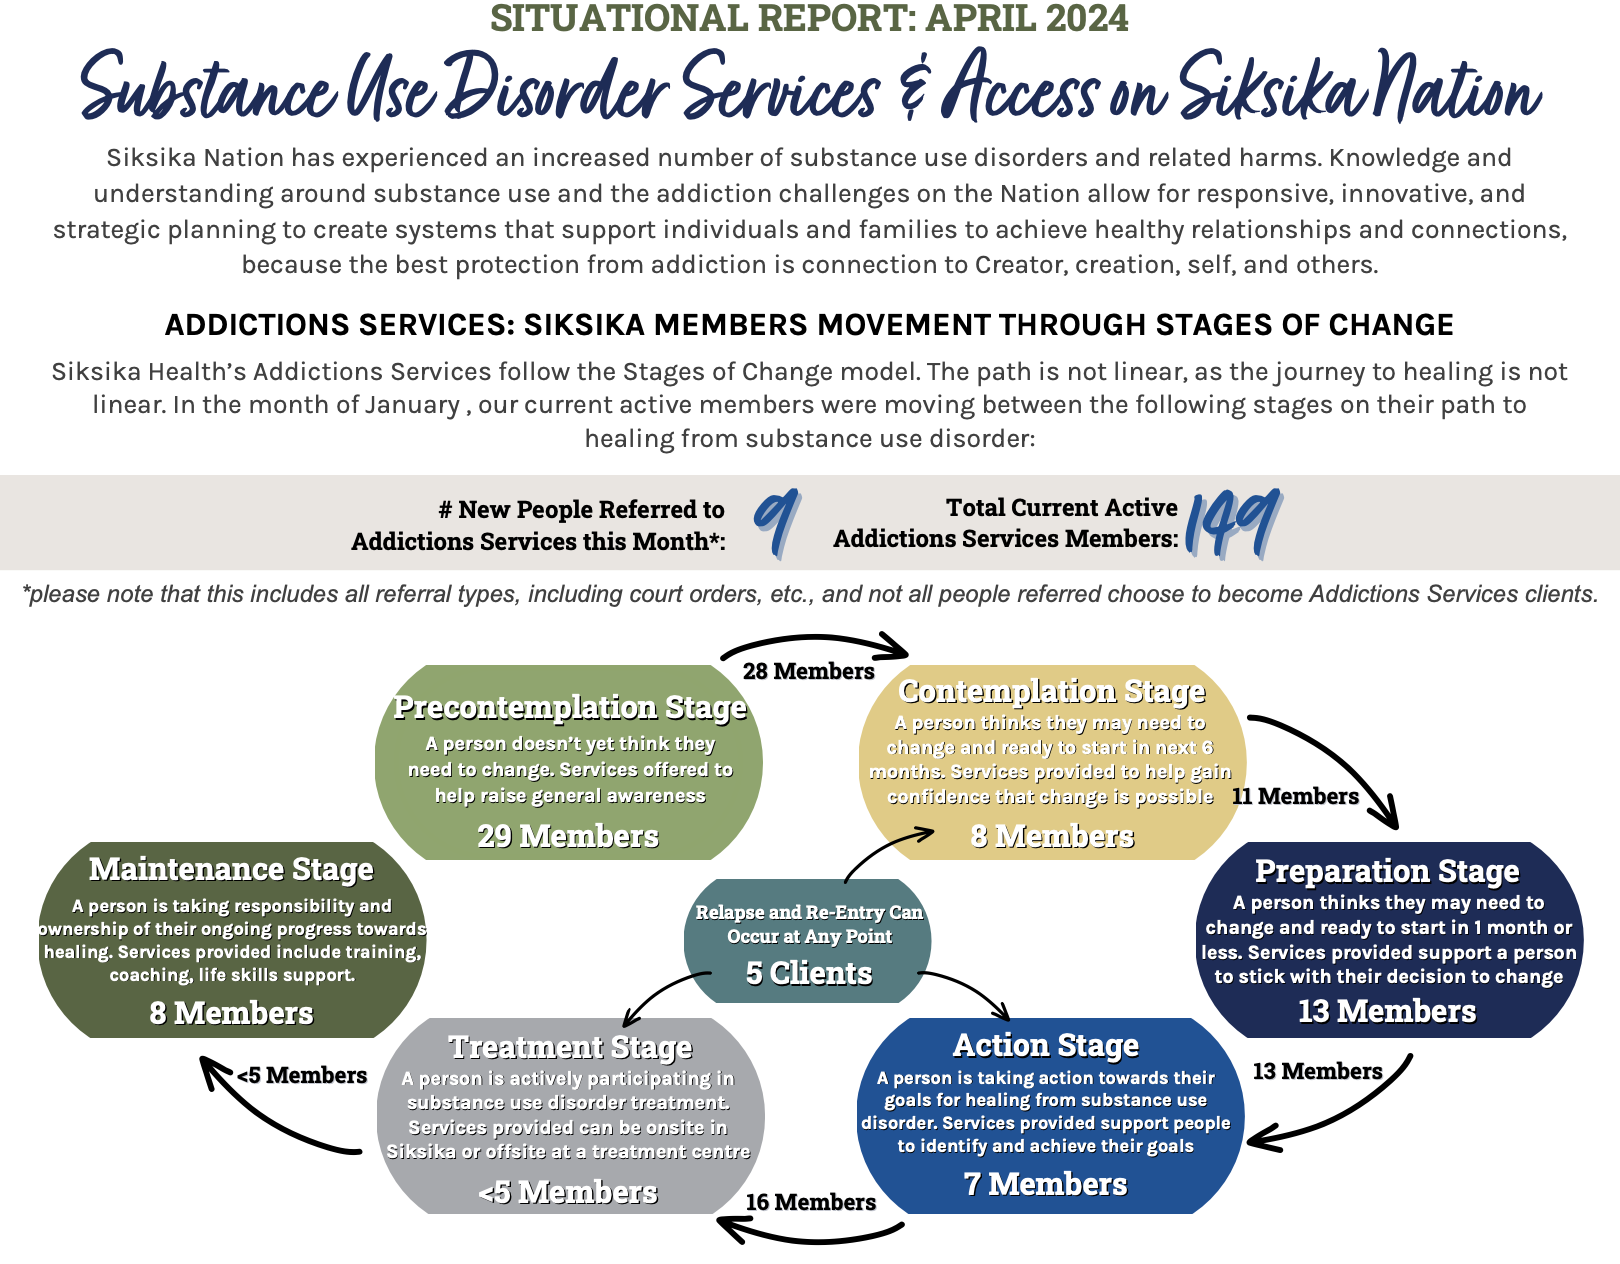 April 2024 Substance Use & Services on Siksika Nation: Situational Report (sitrep)